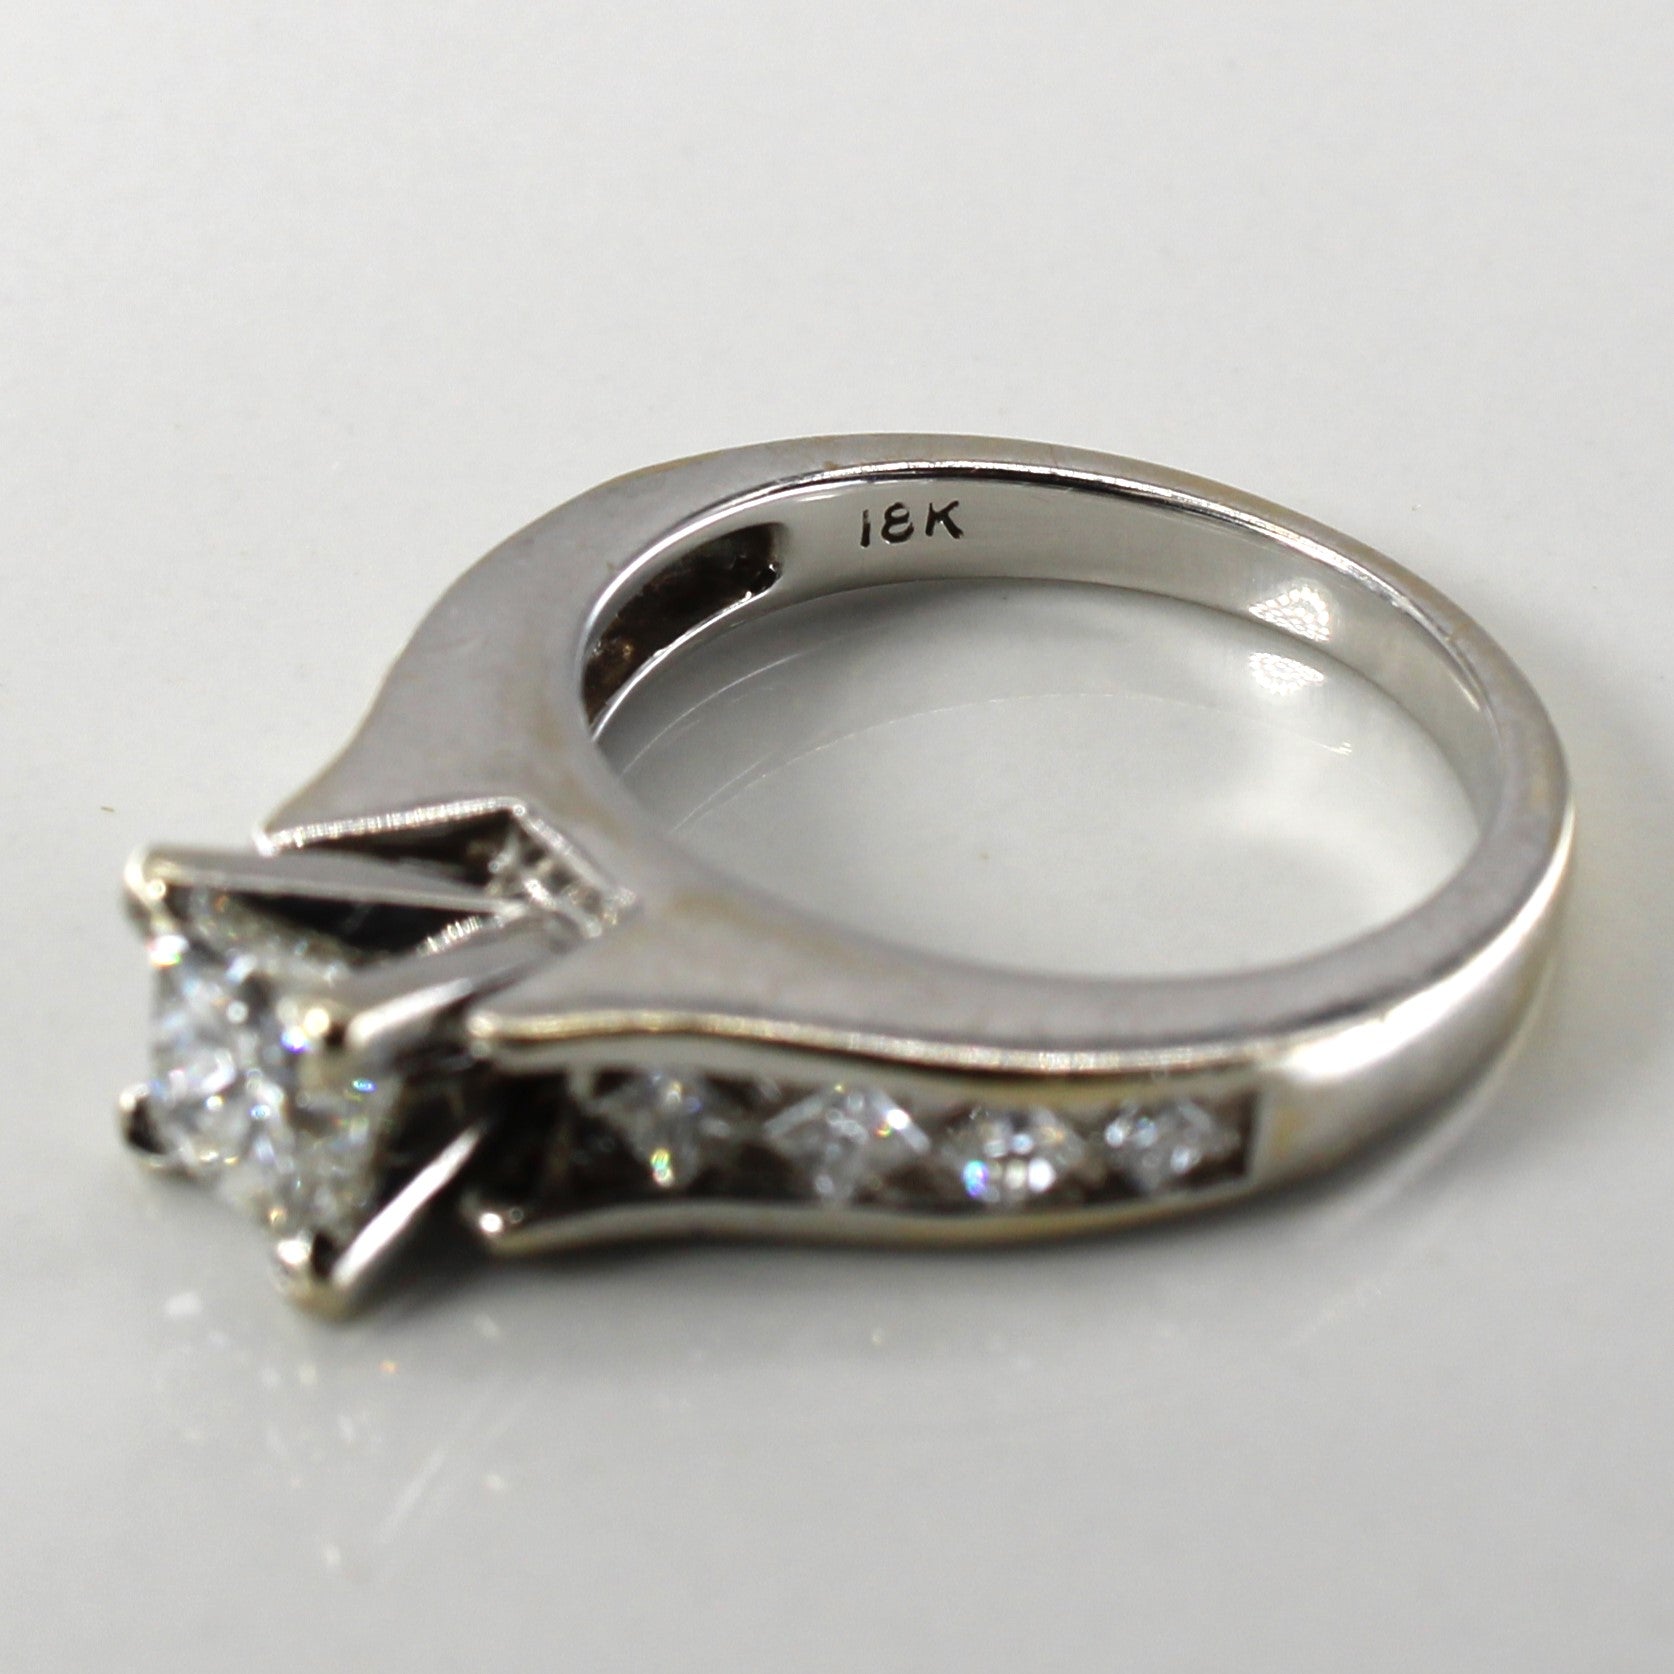 Princess Diamond with Accents Engagement Ring | 1.40ctw | SZ 5 |